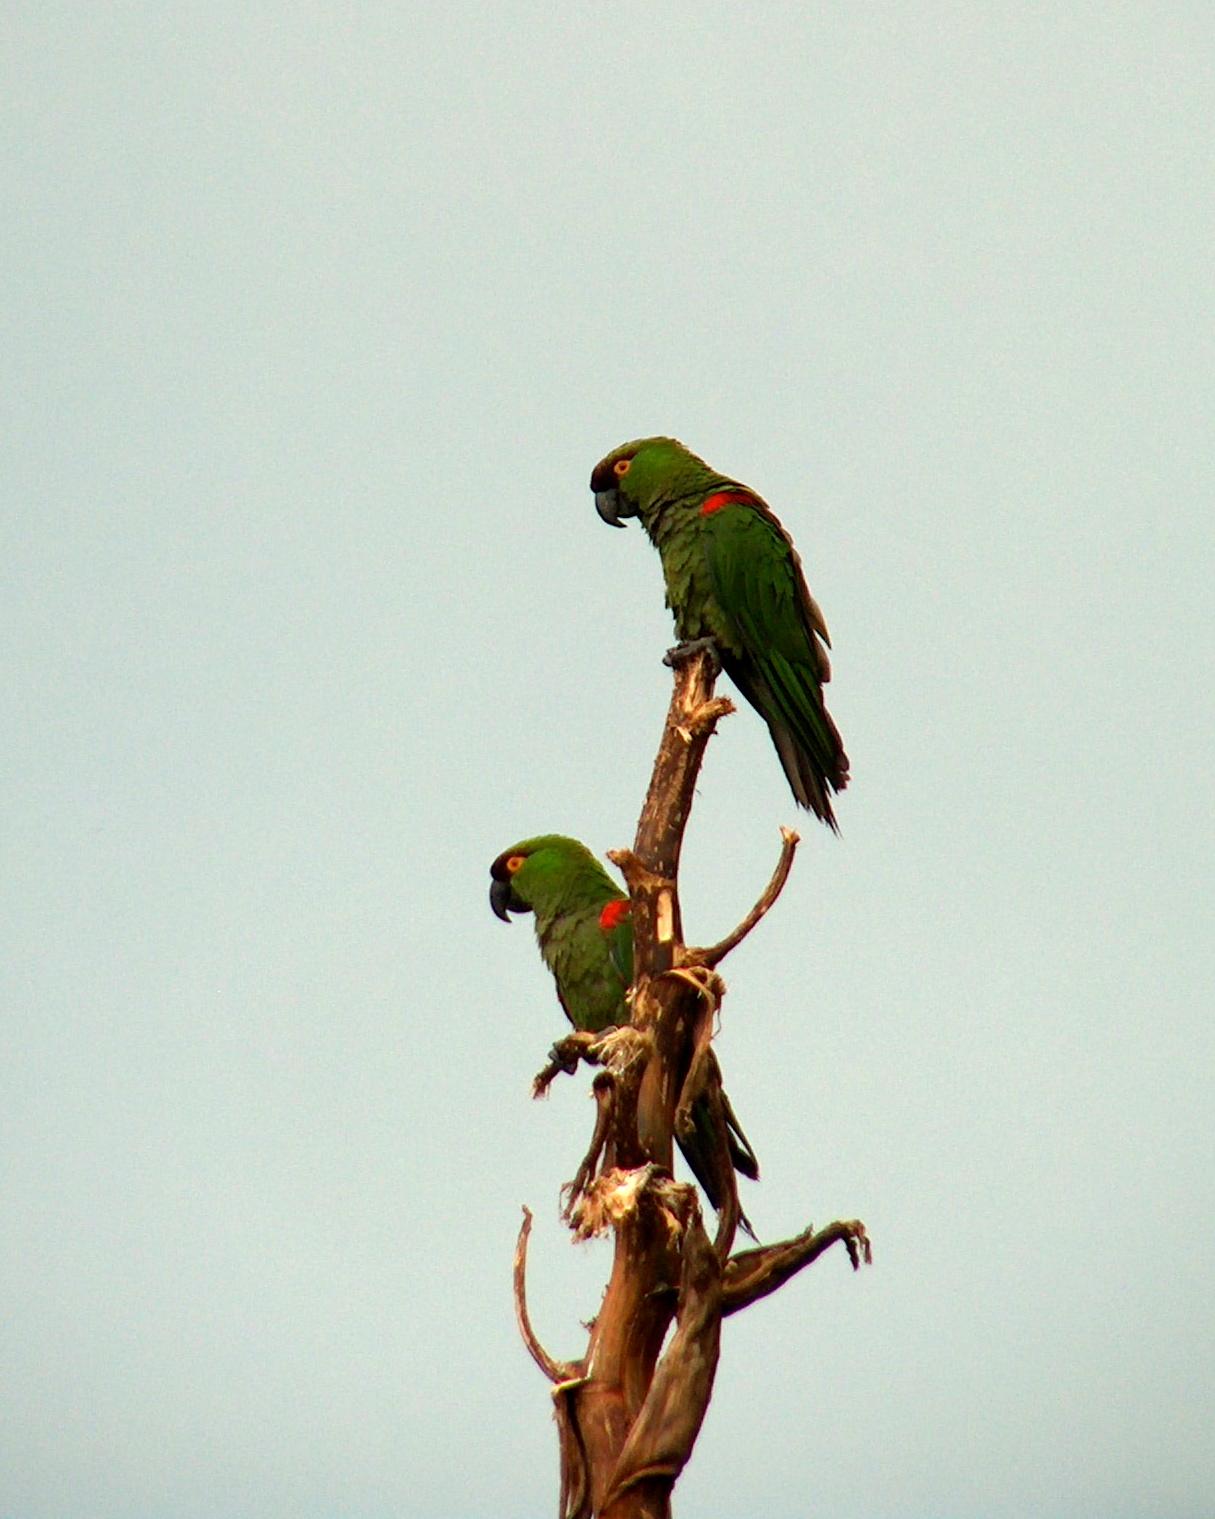 Maroon-fronted Parrot Photo by Alan H Kneidel